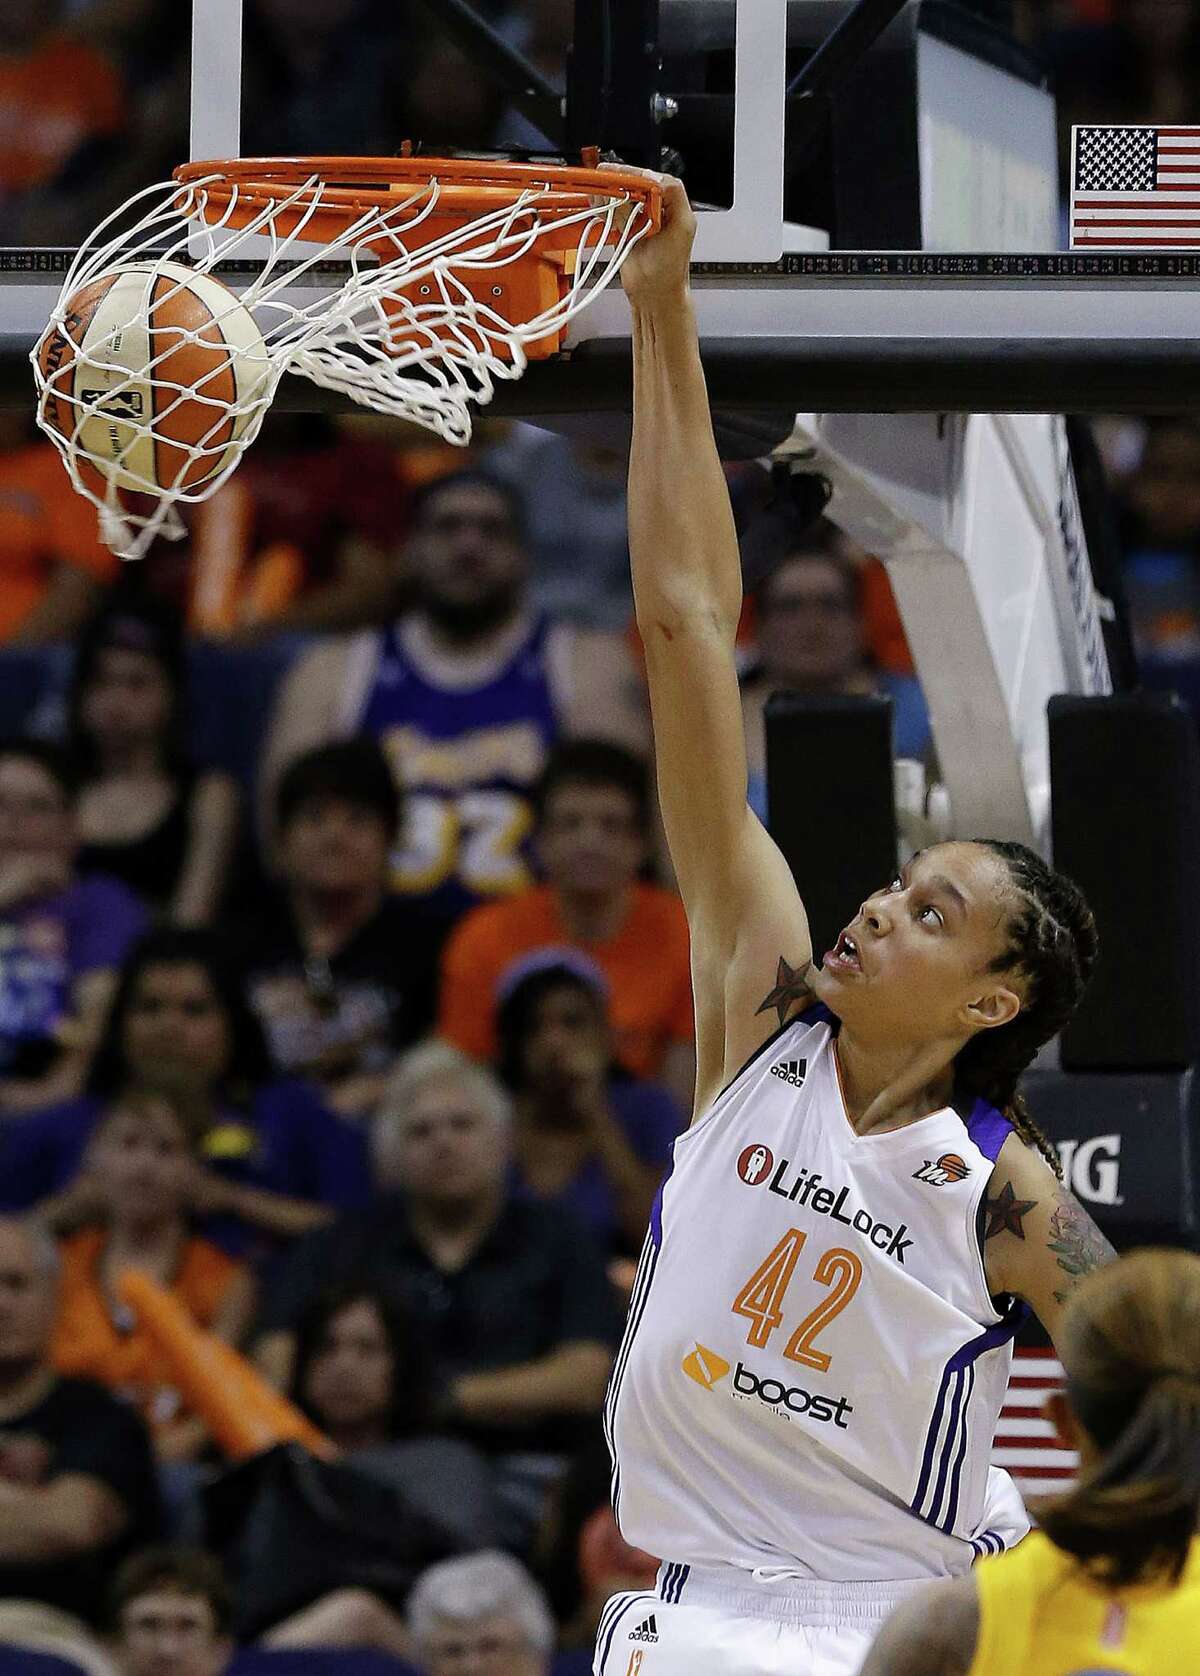 Phoenix Mercury's Brittney Griner gets her first dunk against the Chicago Sky in the second half during a WNBA basketball game on Monday, May 27, 2013, in Phoenix. The Sky defeated the Mercury 102-80. (AP Photo/Ross D. Franklin)